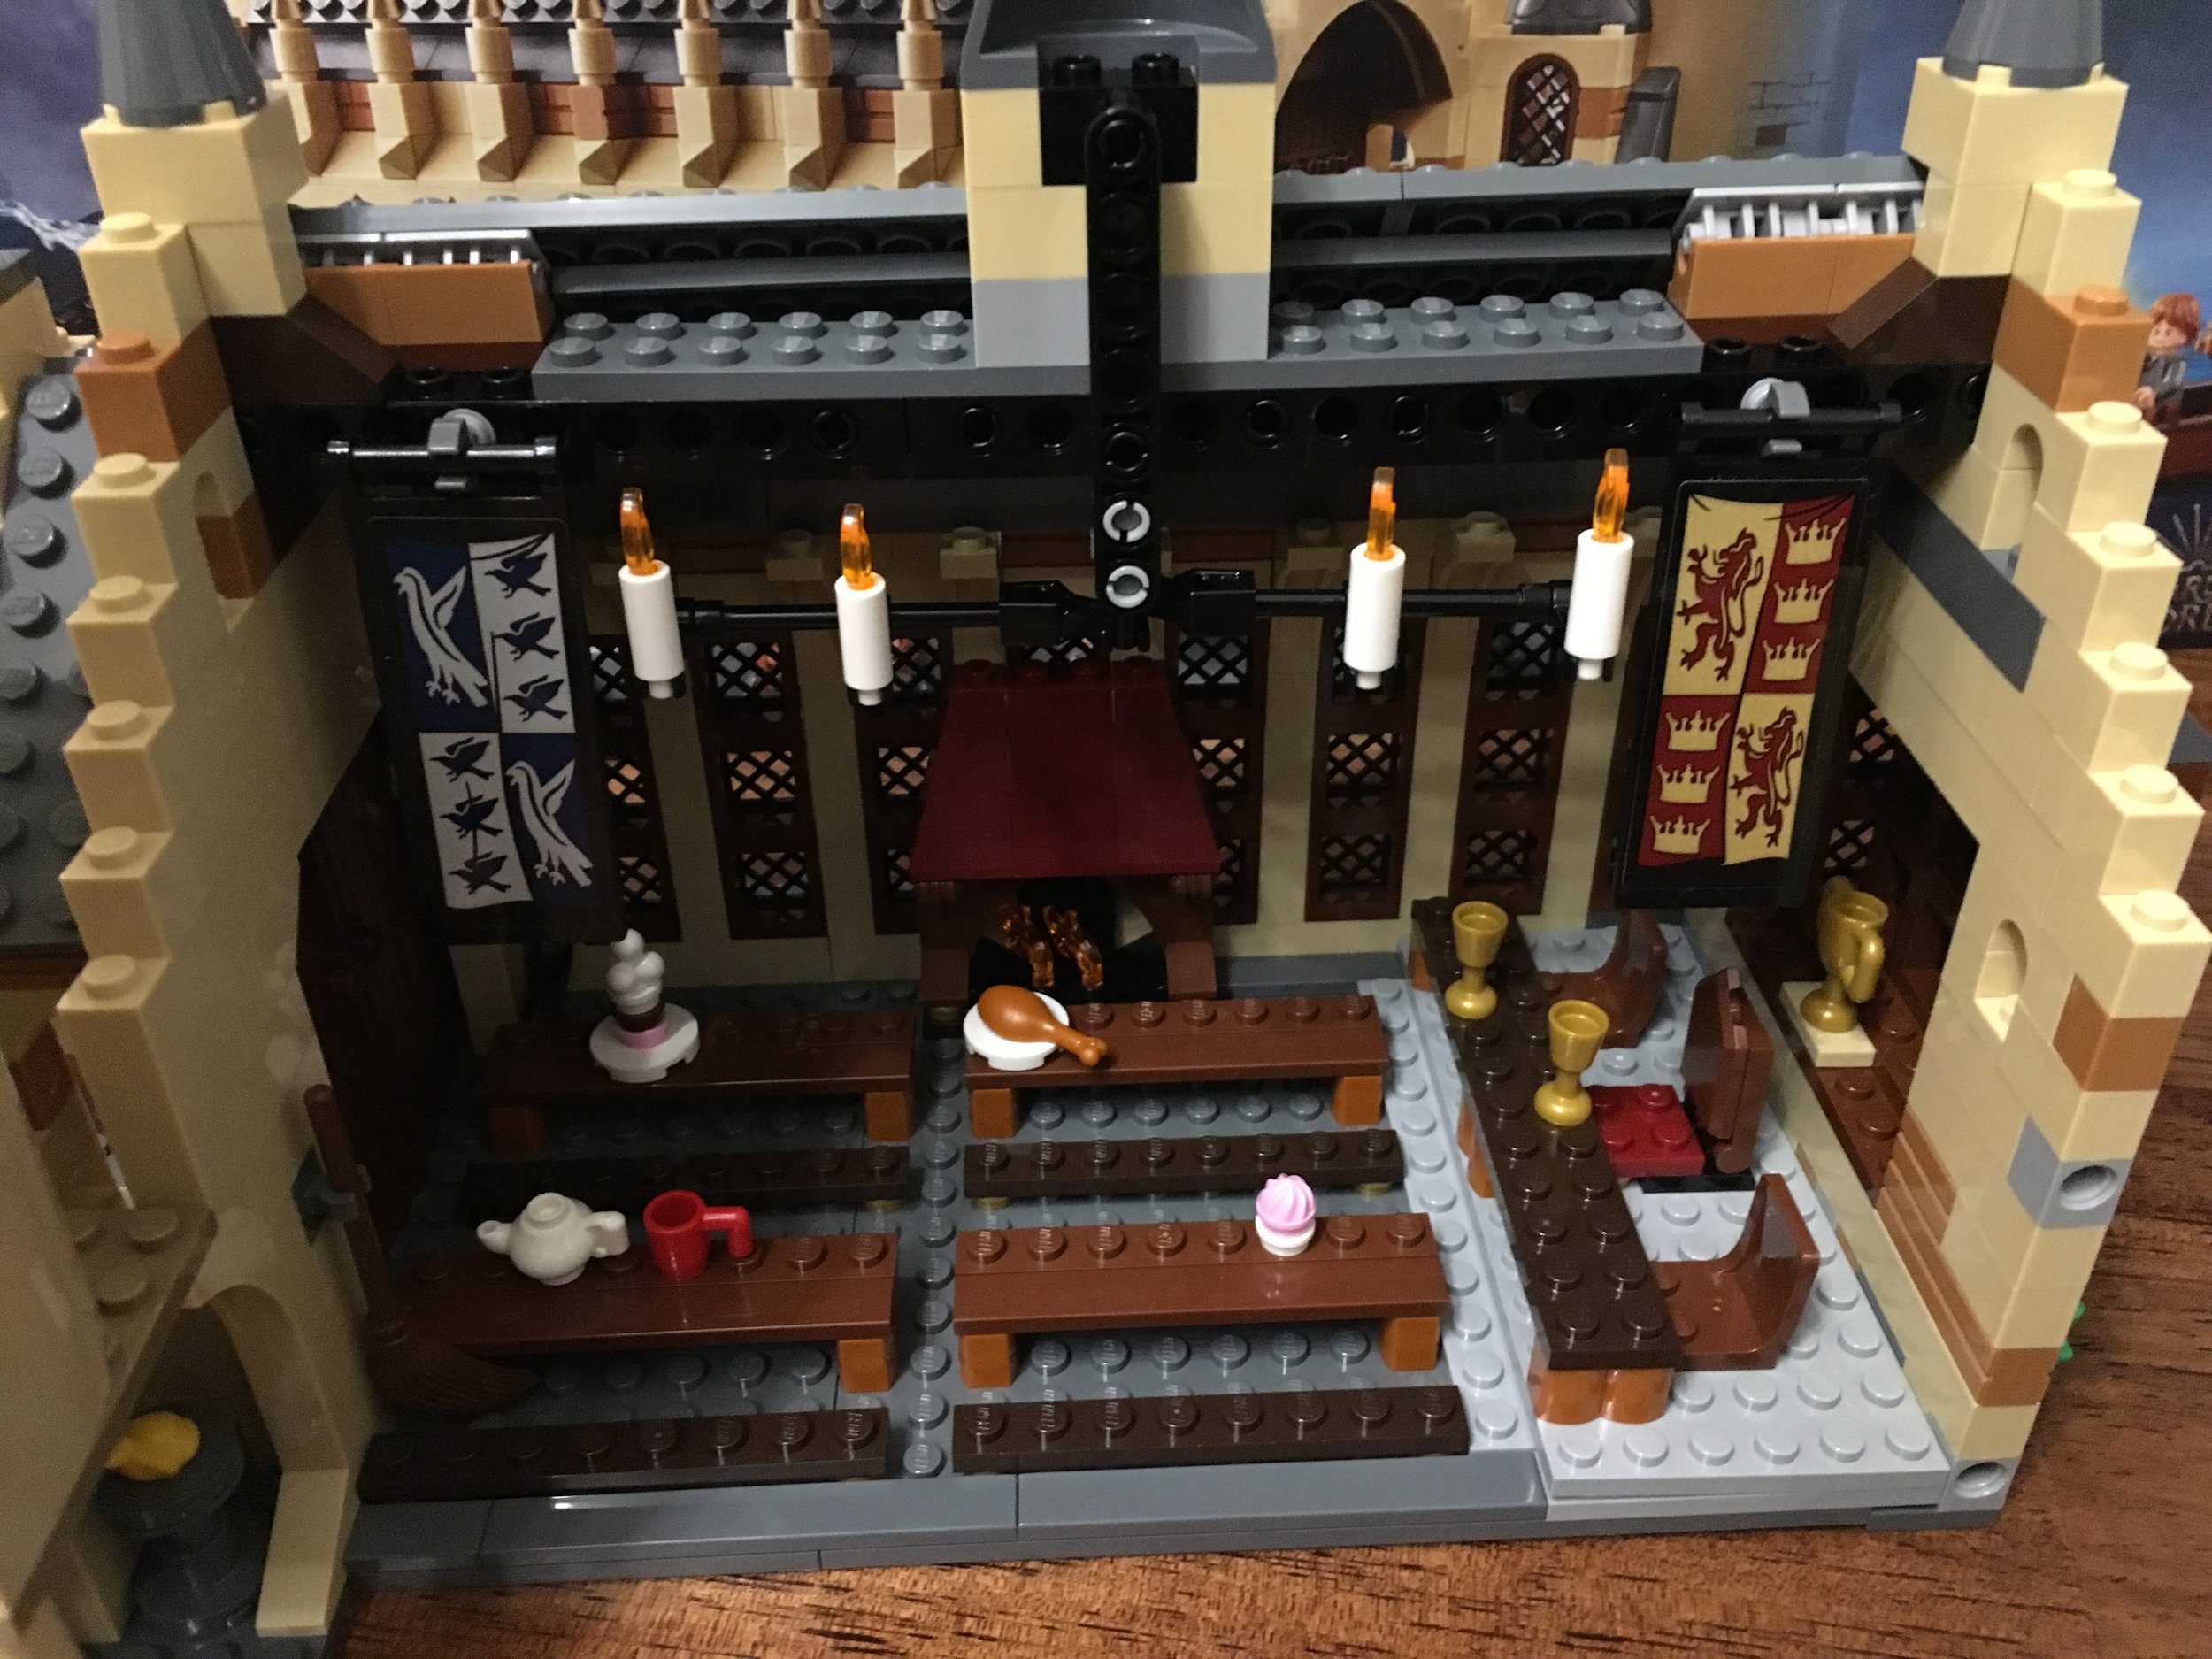 MOC] Decided to beef up the Basilisk from the Great Hall set - My